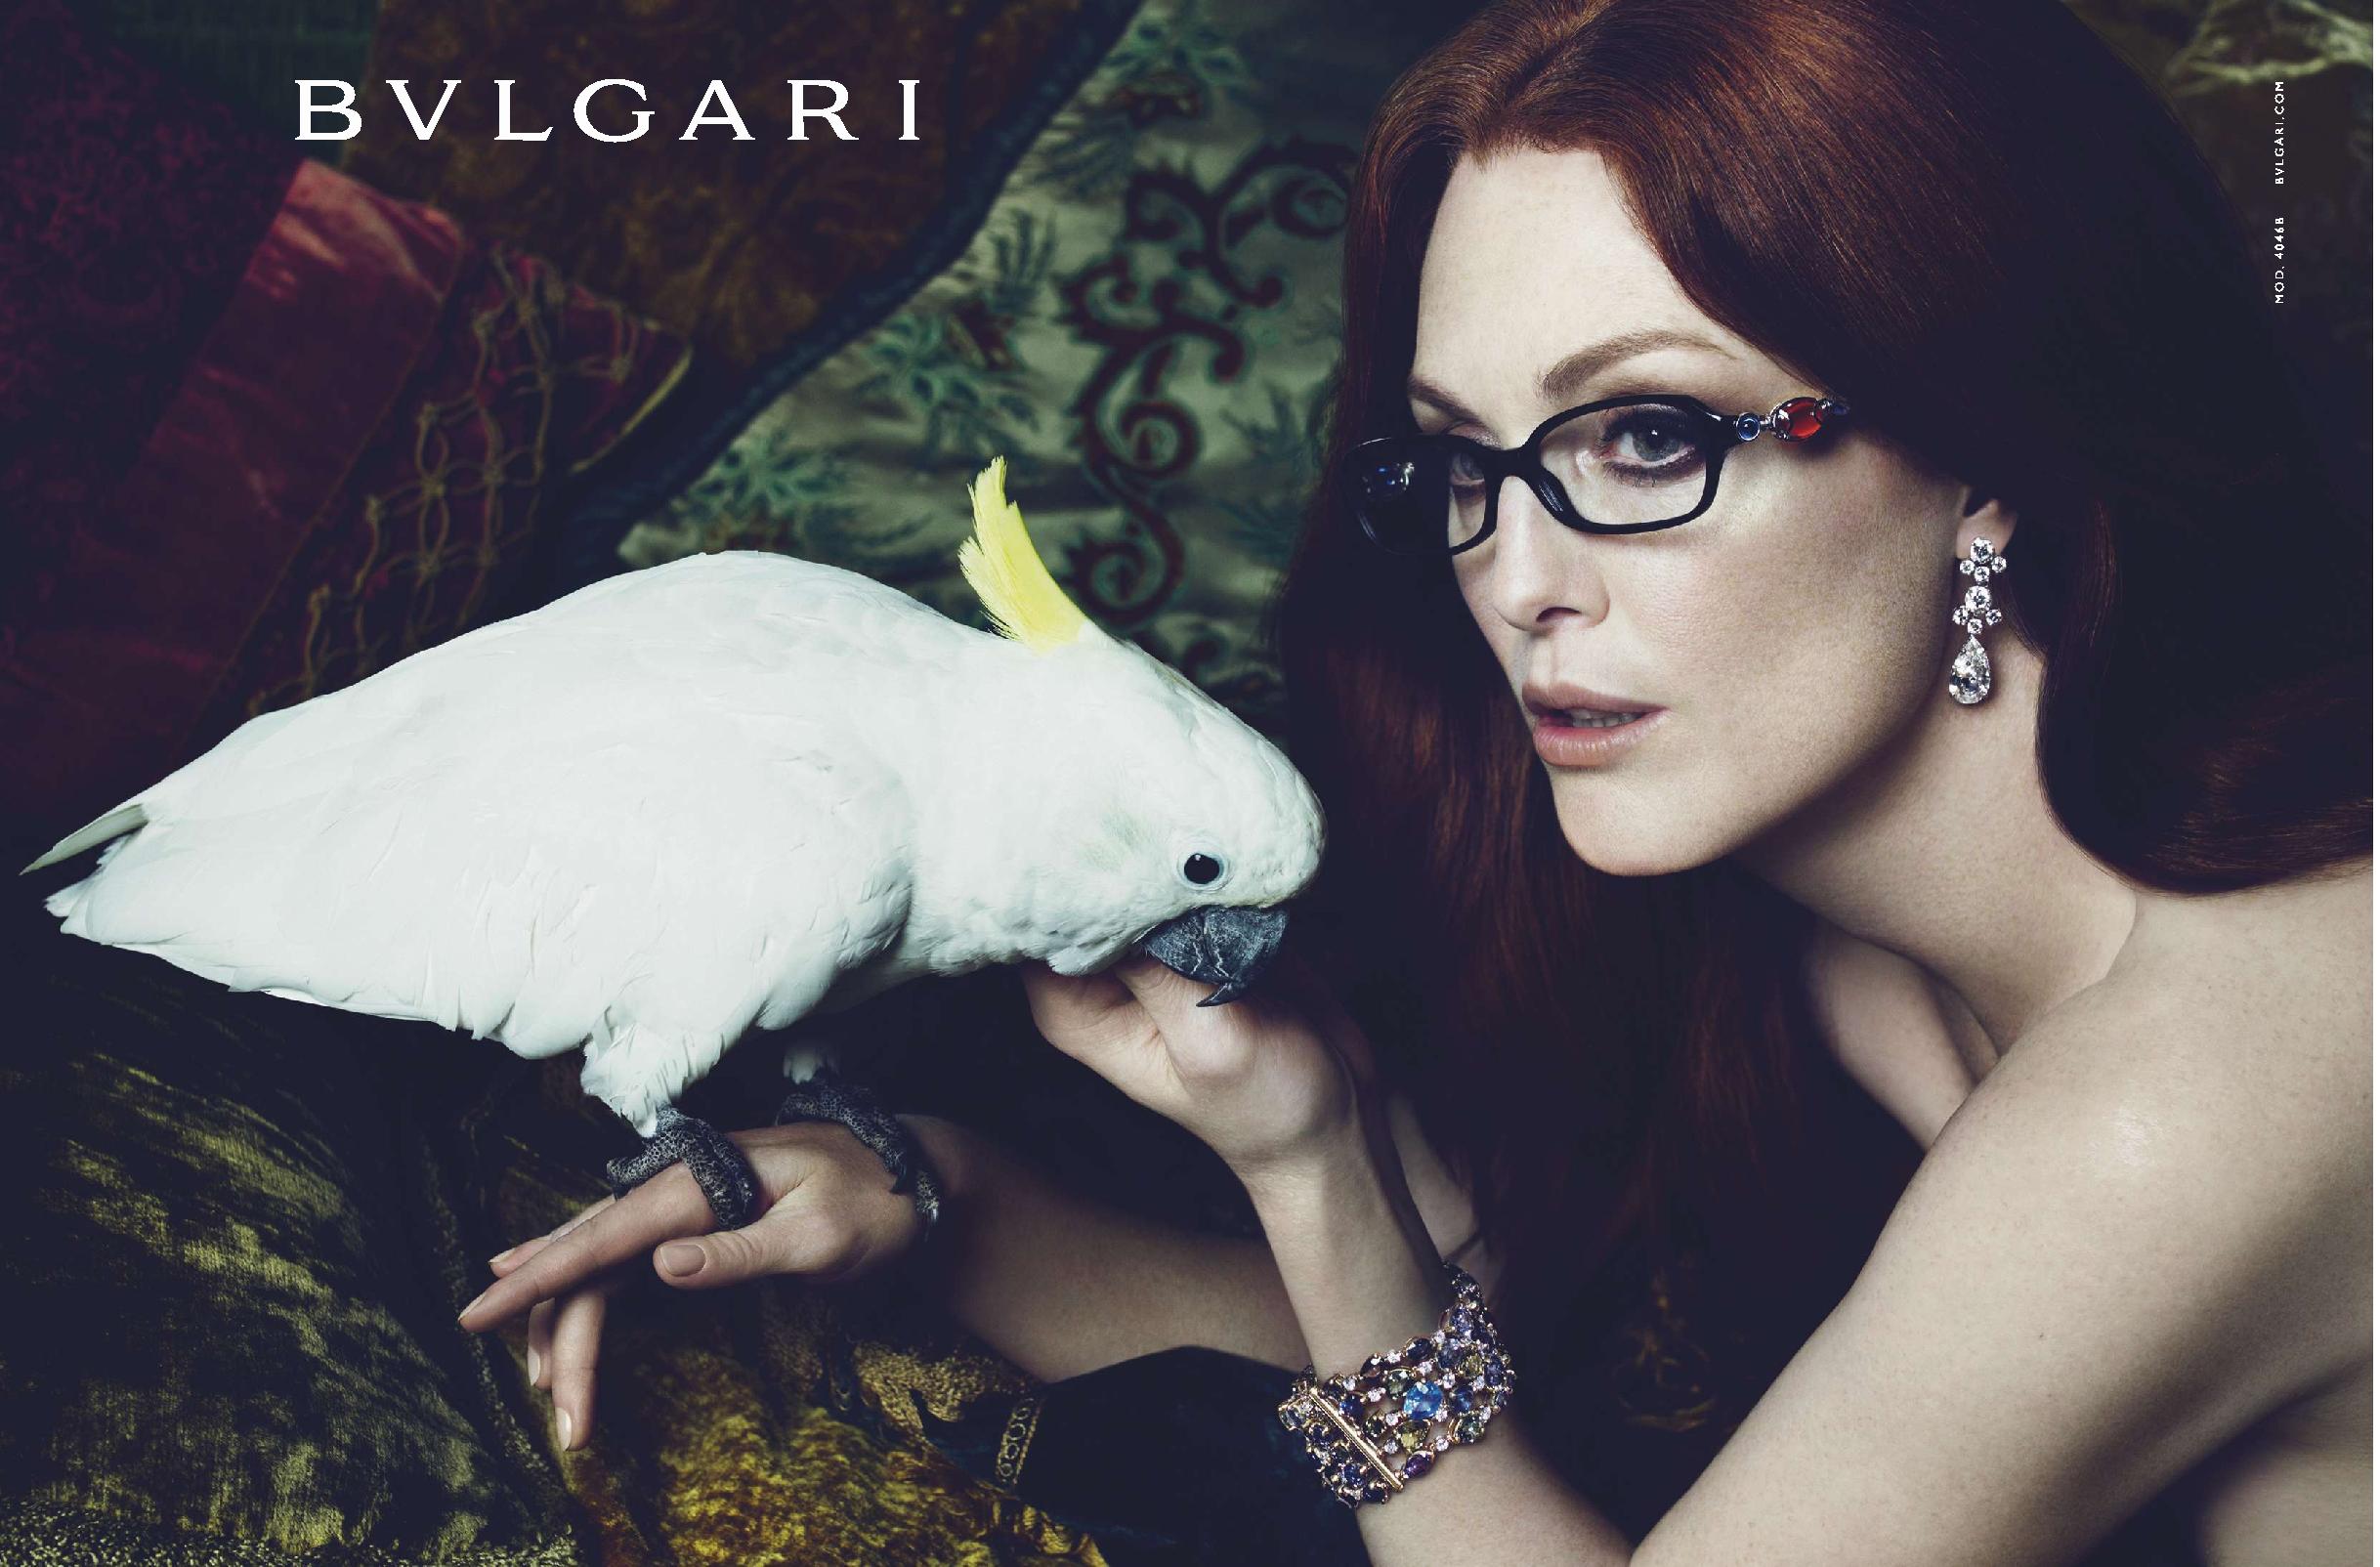 Julianne Moore photo 182 of 974 pics, wallpaper - photo #445435 - ThePlace2